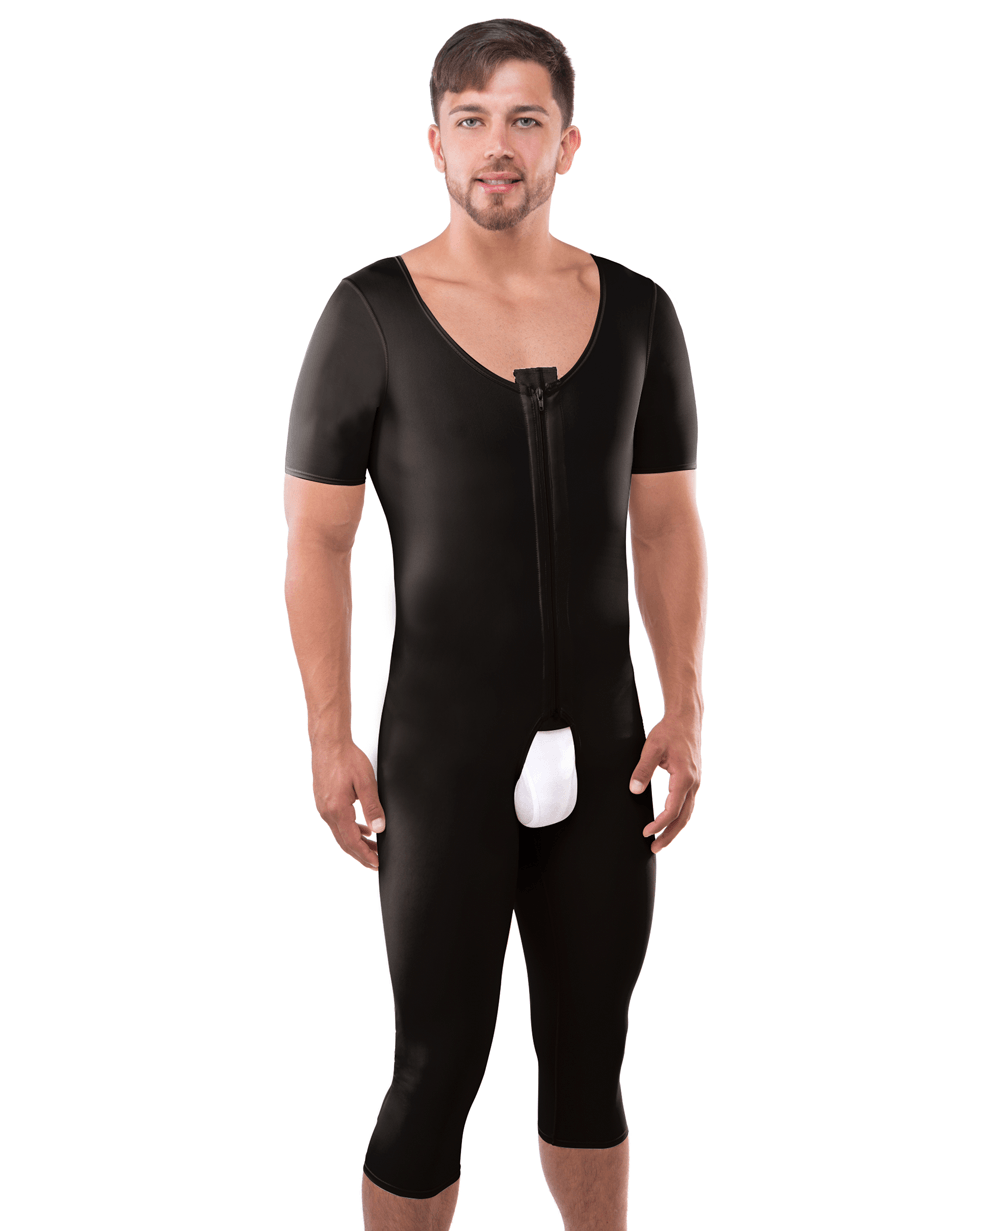 Male Full Body Mid Below the Knee Abdominal Cosmetic Surgery Compression Garment with Zipper (Short Sleeve)(MG07-BK) - Isavela Compression Garments